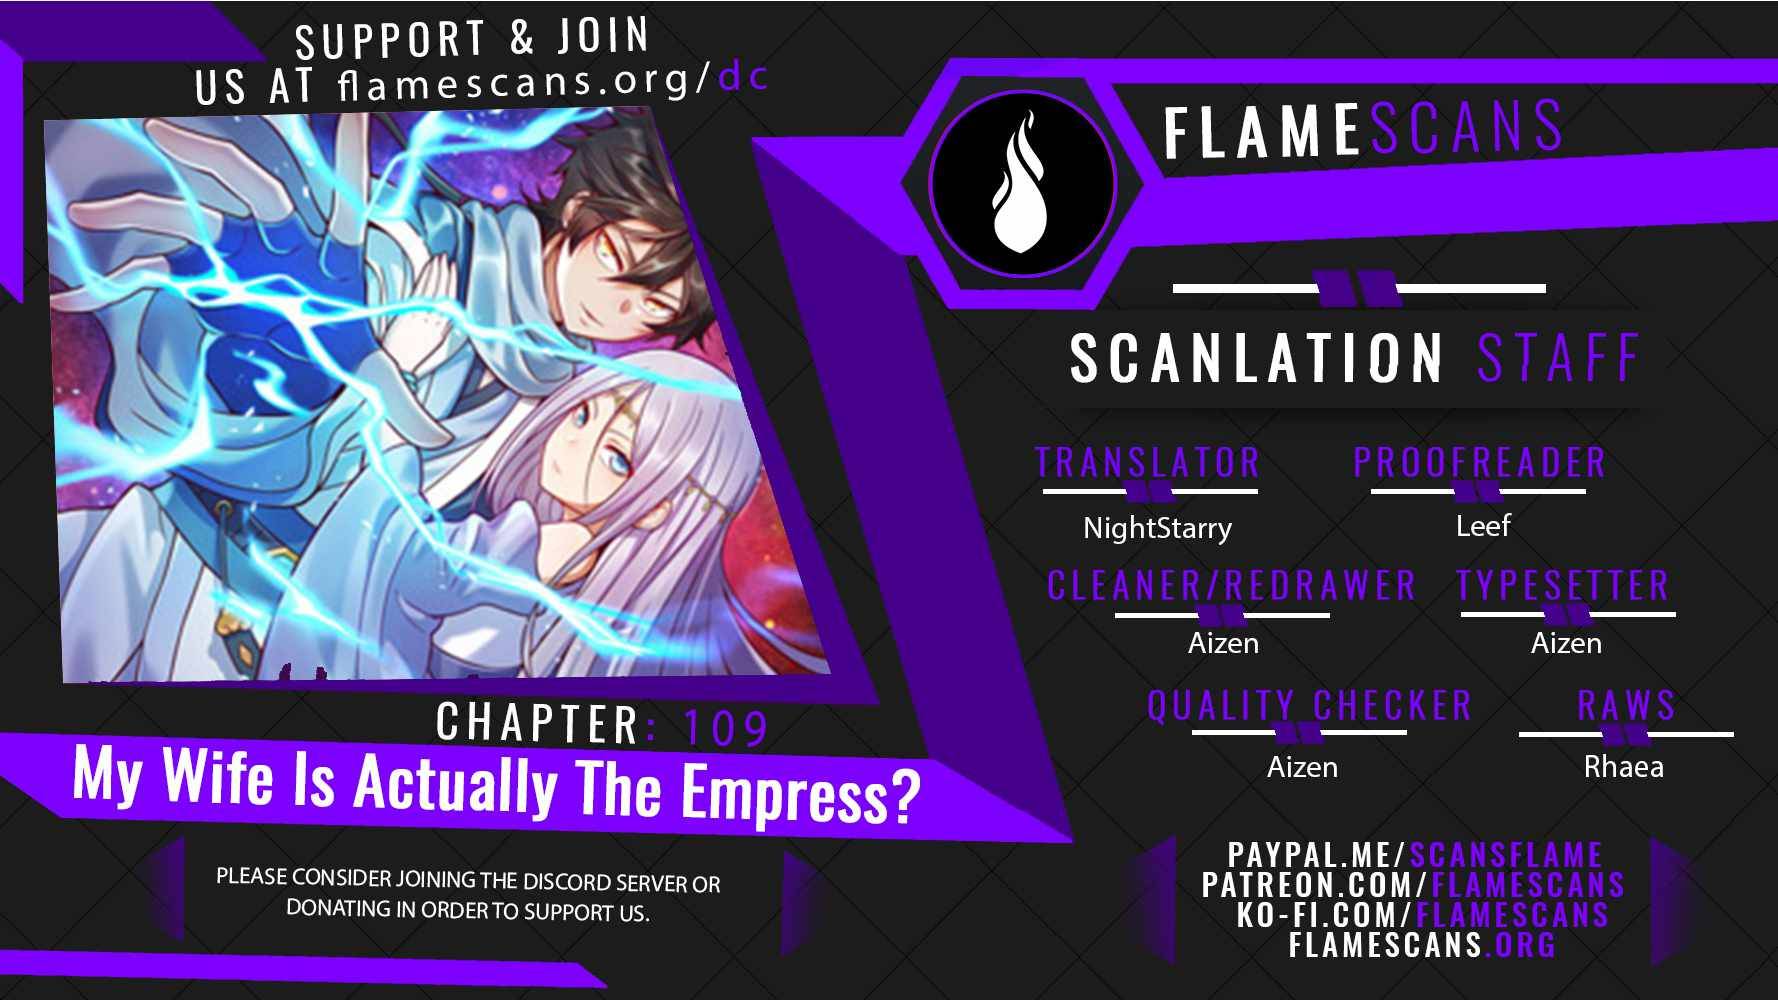 My Wife Is Actually The Empress? Chapter 109